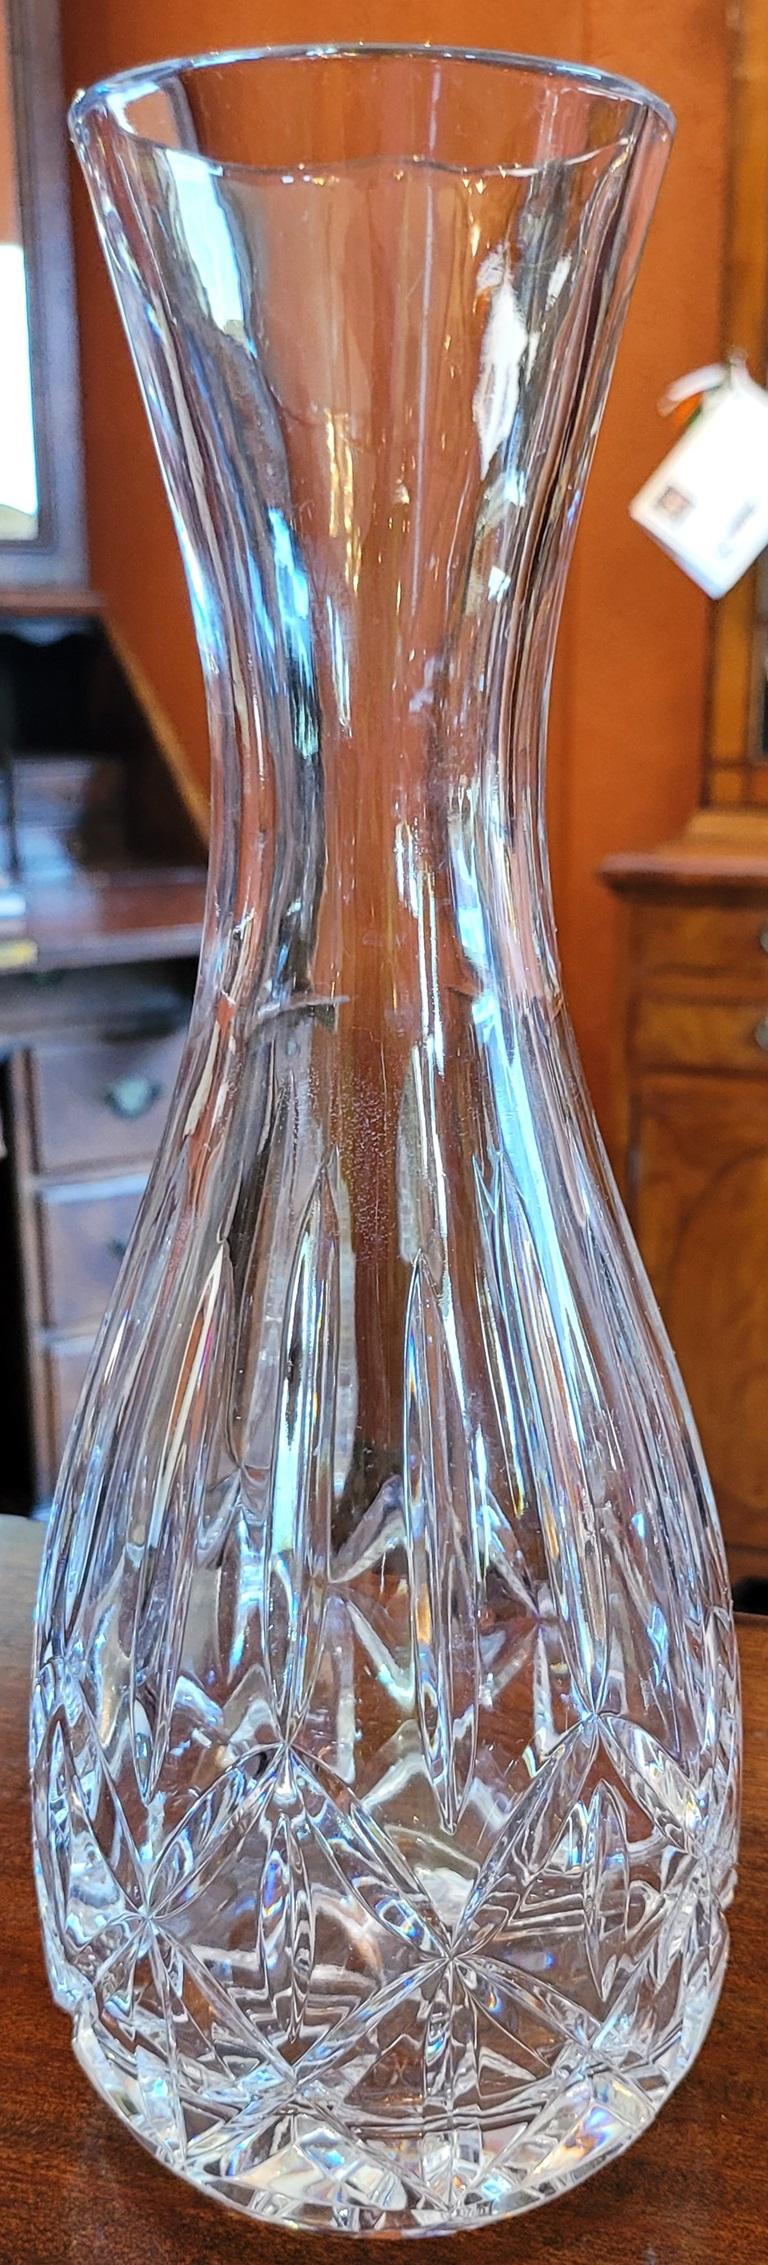 Hand-Carved Irish Galway Crystal 11.5 inch Open Decanter For Sale